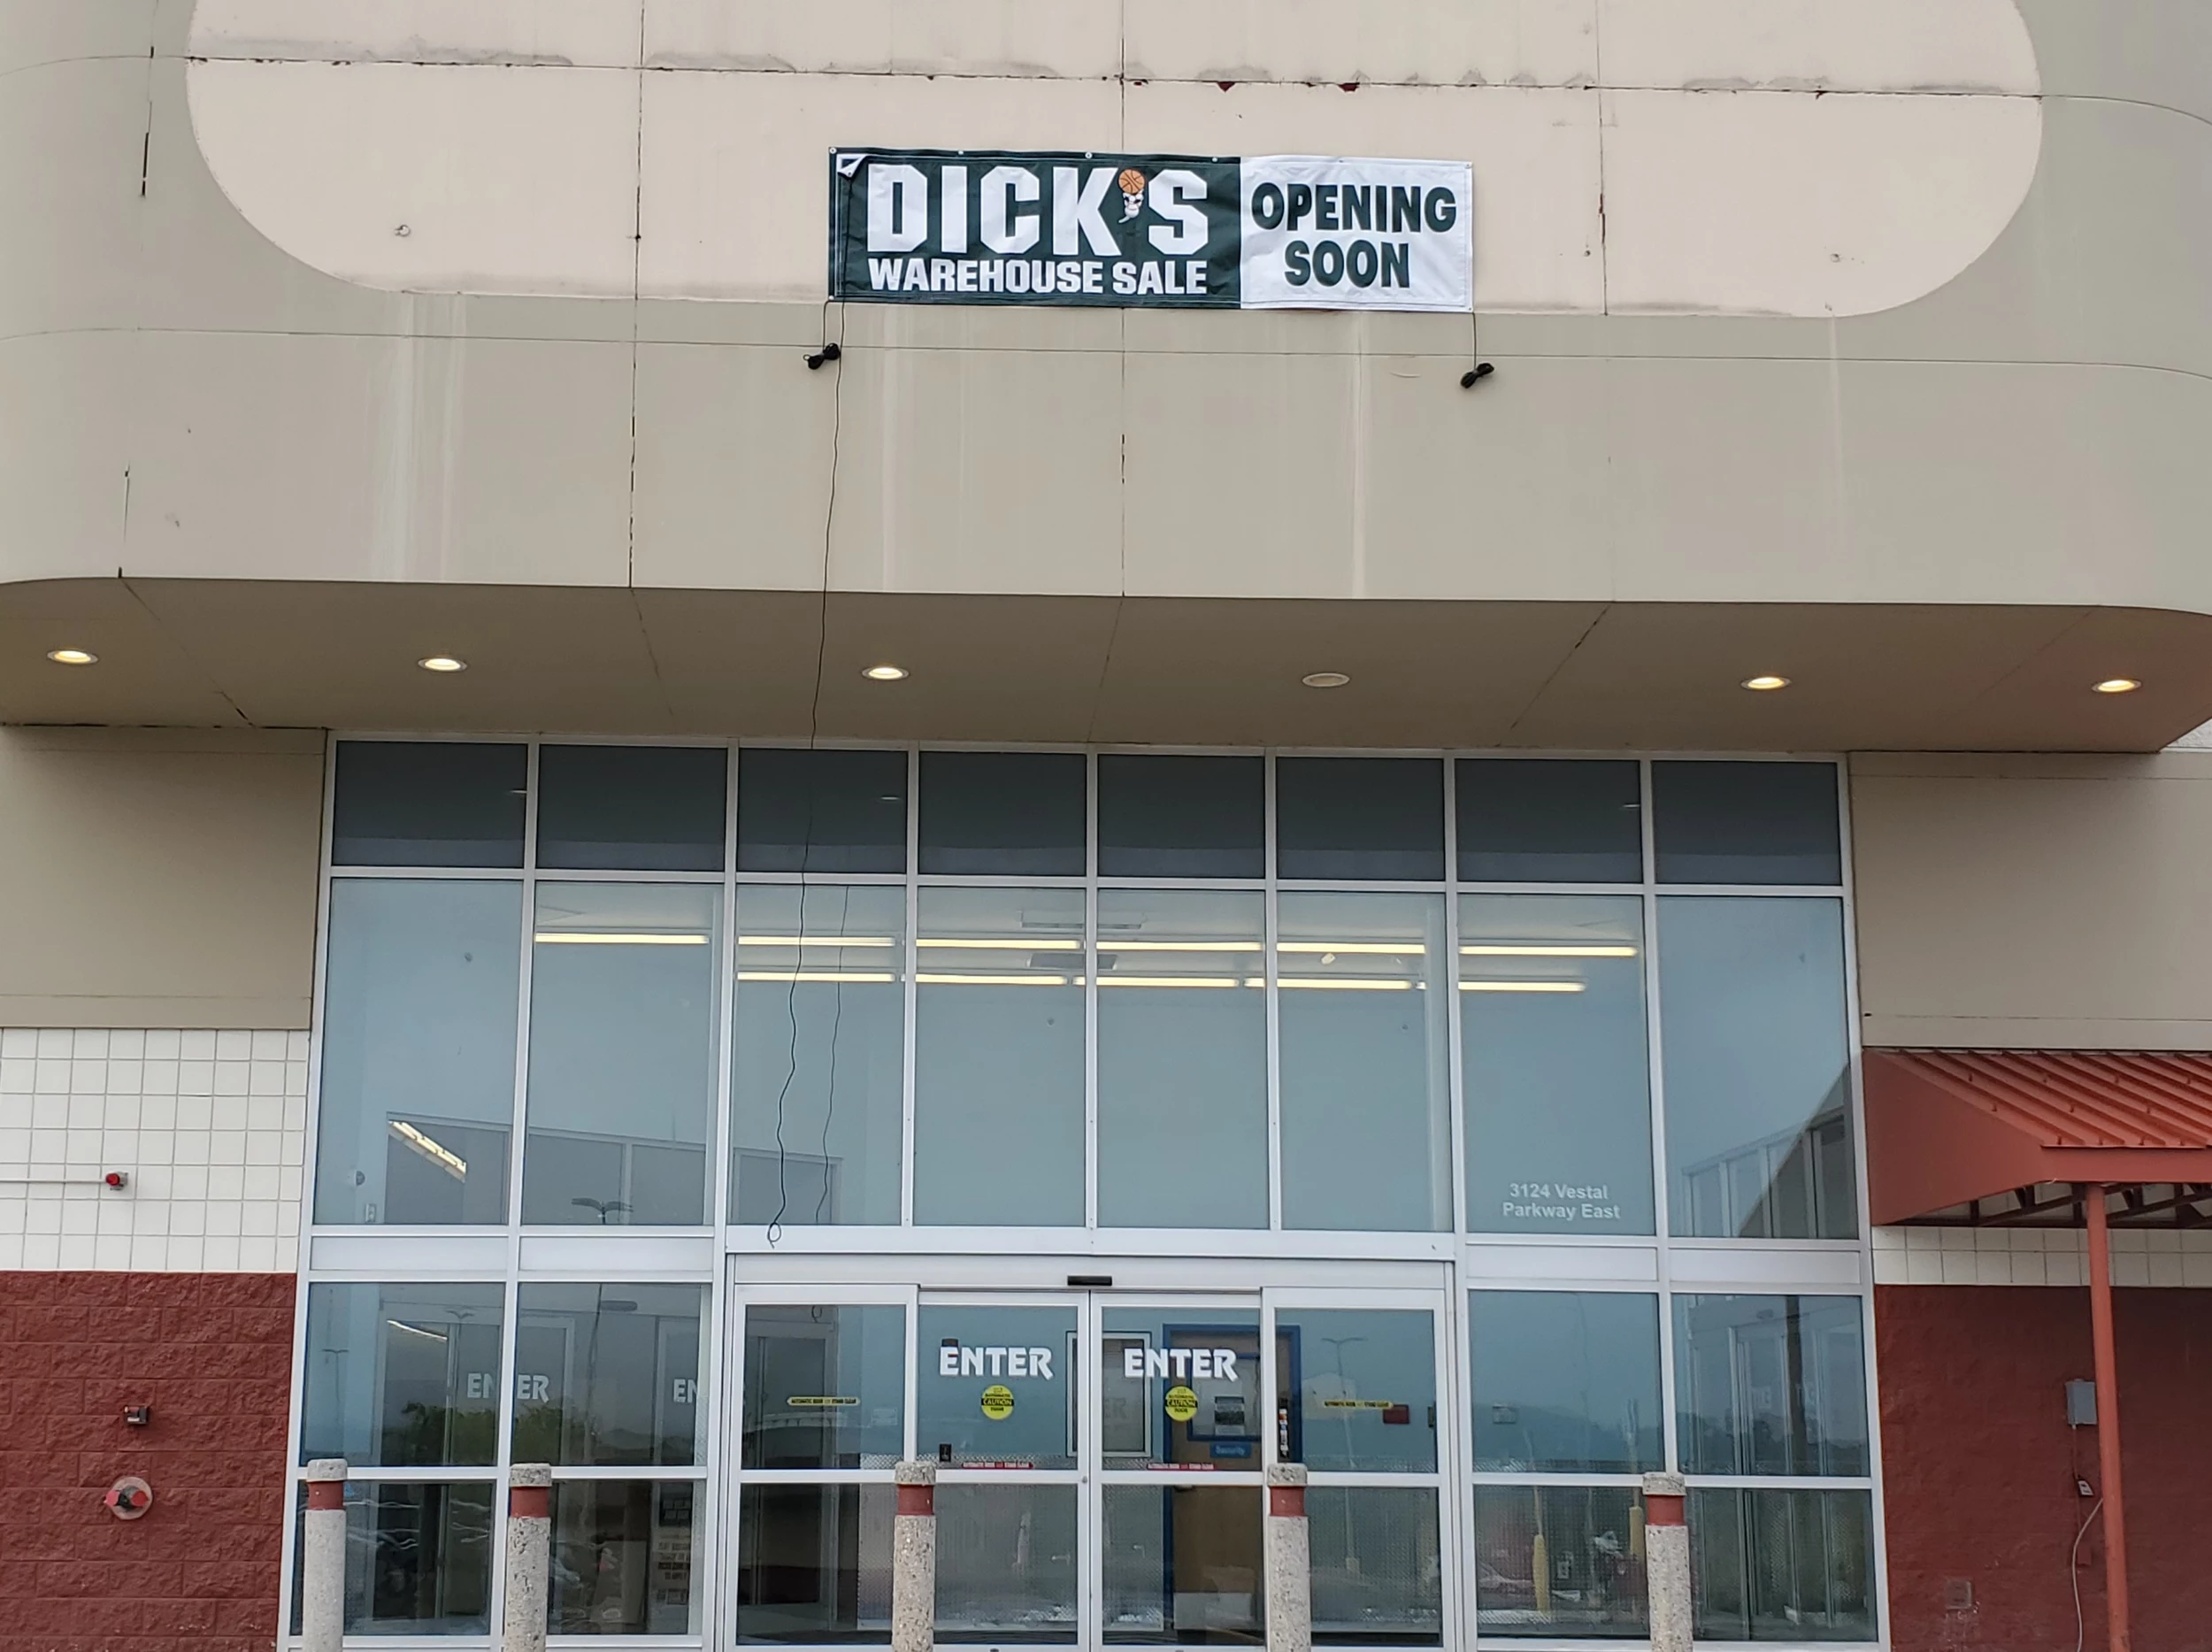 New Dicks Sporting Goods Warehouse Sale Store Opening in Vestal pic